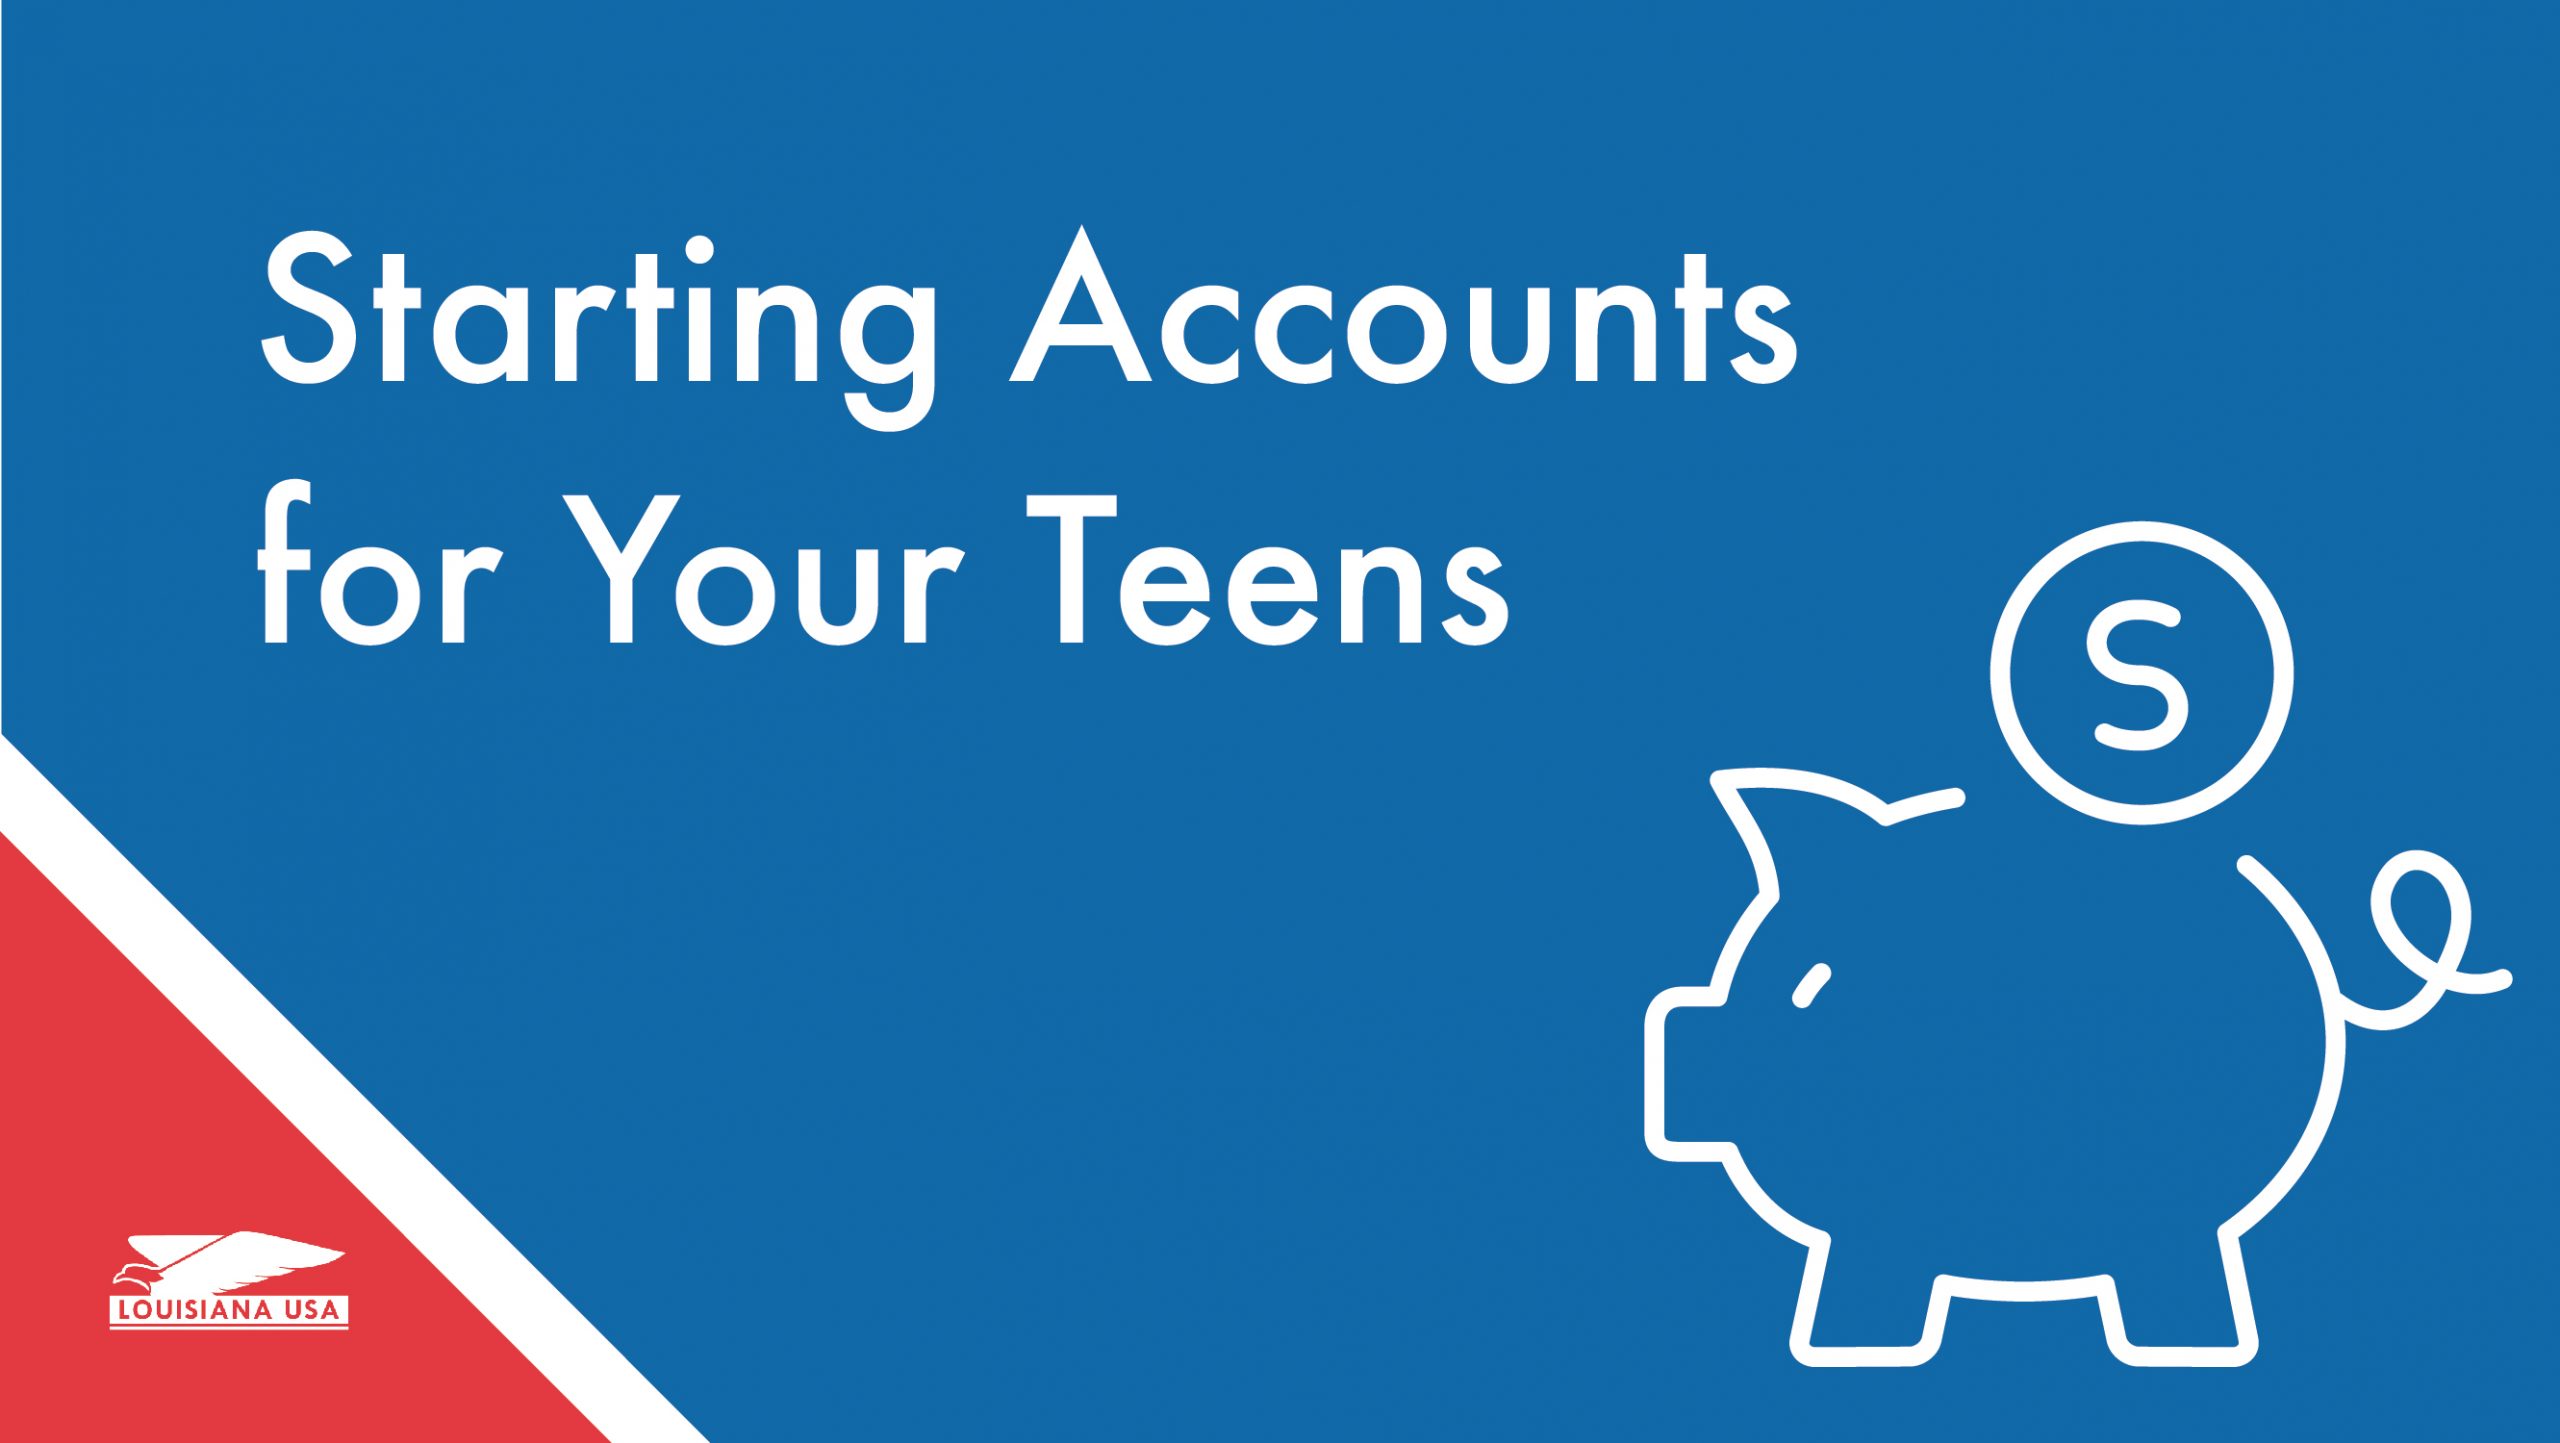 Louisiana USA Federal Credit Union, Starting Accounts For Your Teens